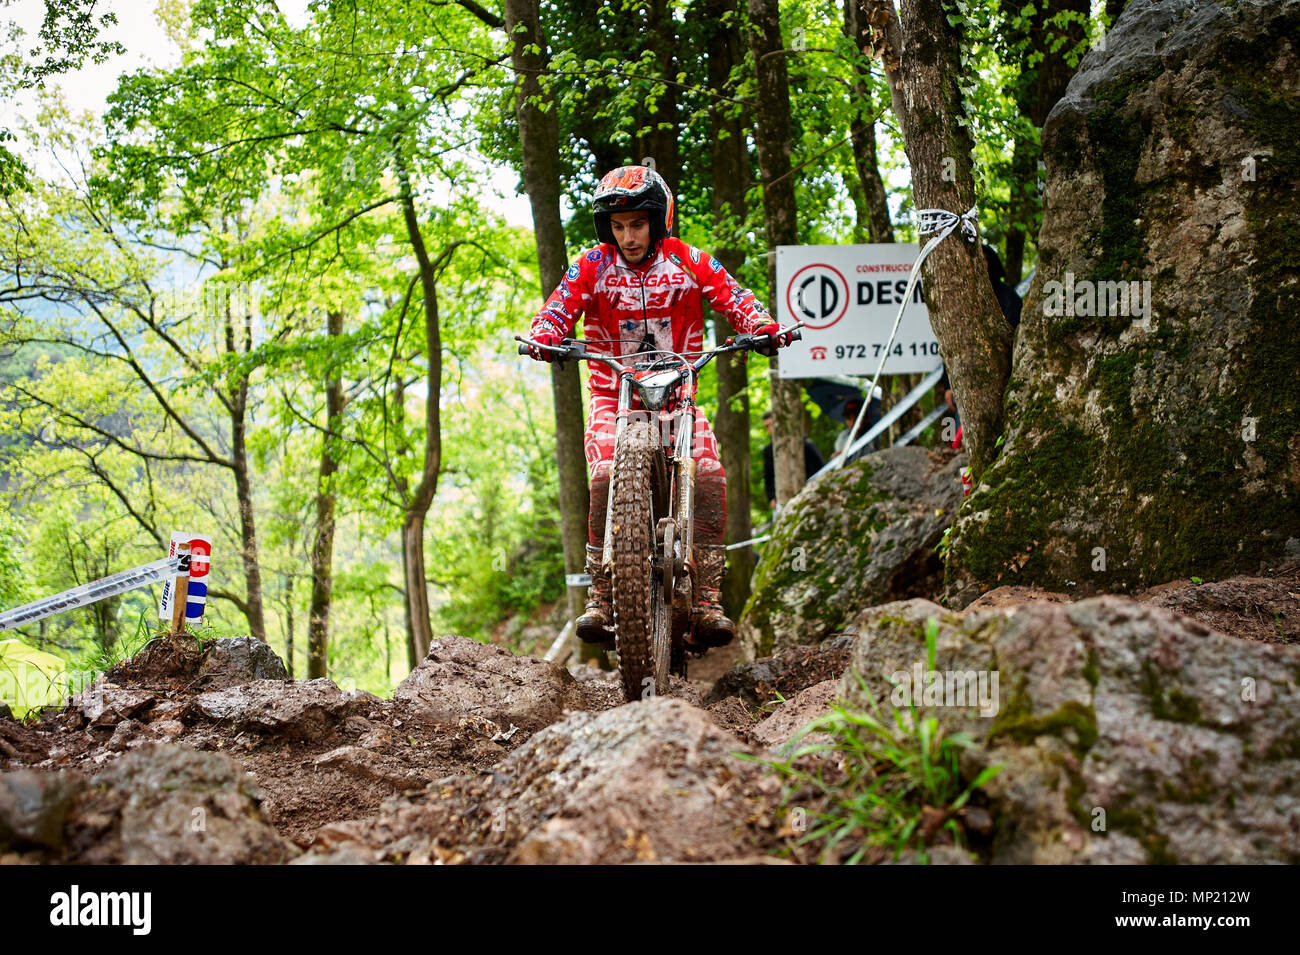 Camprodon, Girona, Spain. 20th May, 2018. FIM Trial World Championships, Spain; Jeroni Fajardo of the TrialGP class in action during the very wet race Credit: Action Plus Sports/Alamy Live News Stock Photo